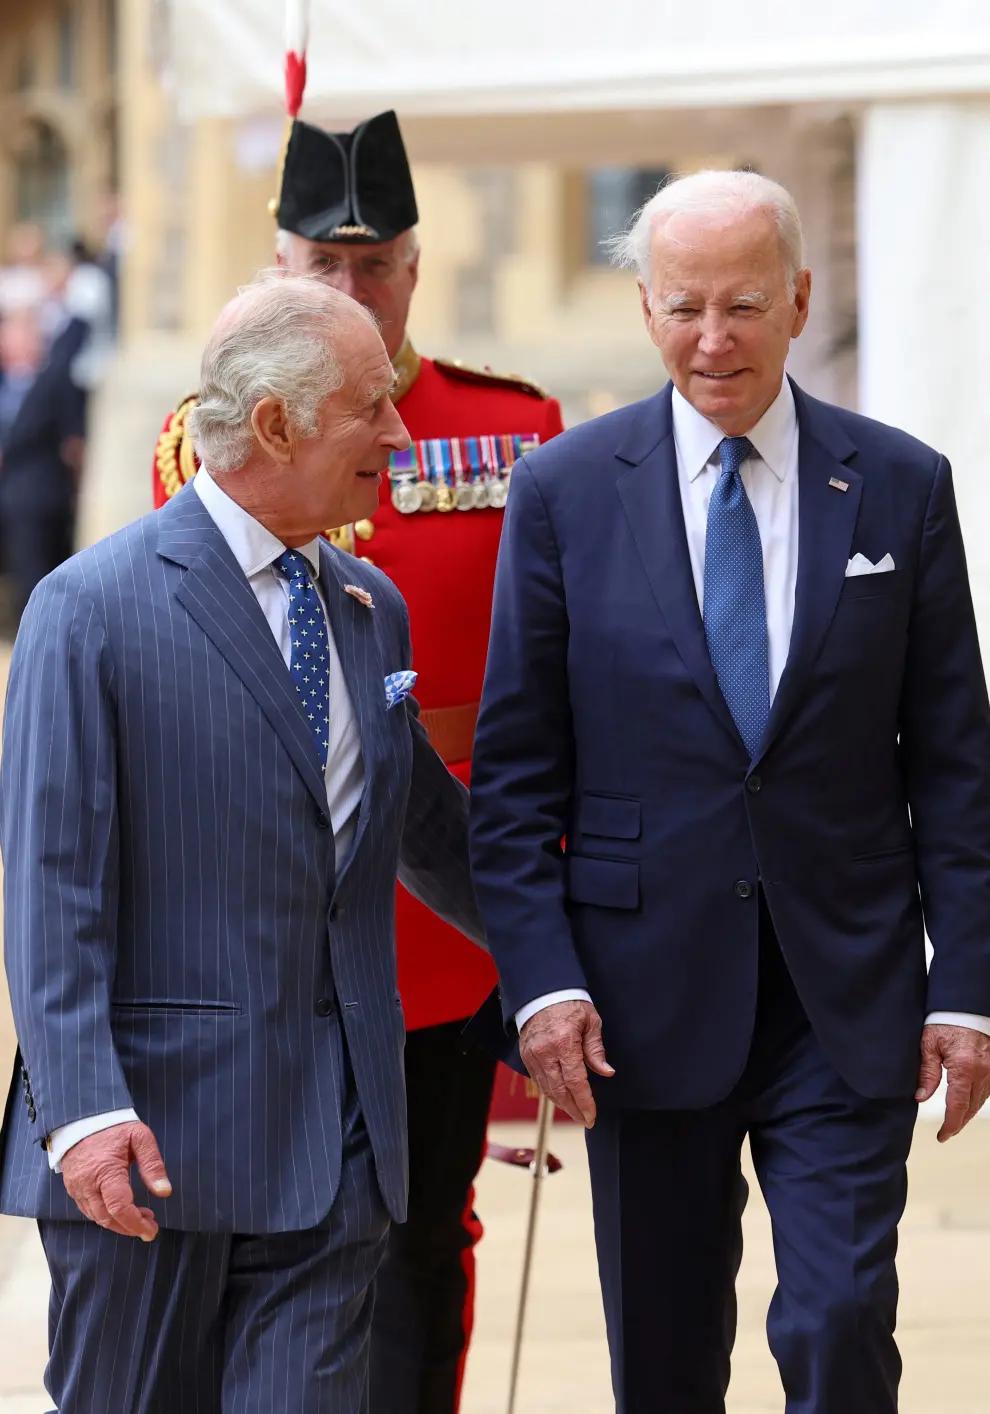 Grant Shapps, Secretary of State for Energy Security and Net Zero and U.S. Special Presidential Envoy for Climate John Kerry attend the welcome ceremony of U.S. President Biden at Windsor Castle on July 10, 2023 in Windsor, England.  Chris Jackson/Pool via REUTERS USA-BIDEN/BRITAIN-WINDSOR